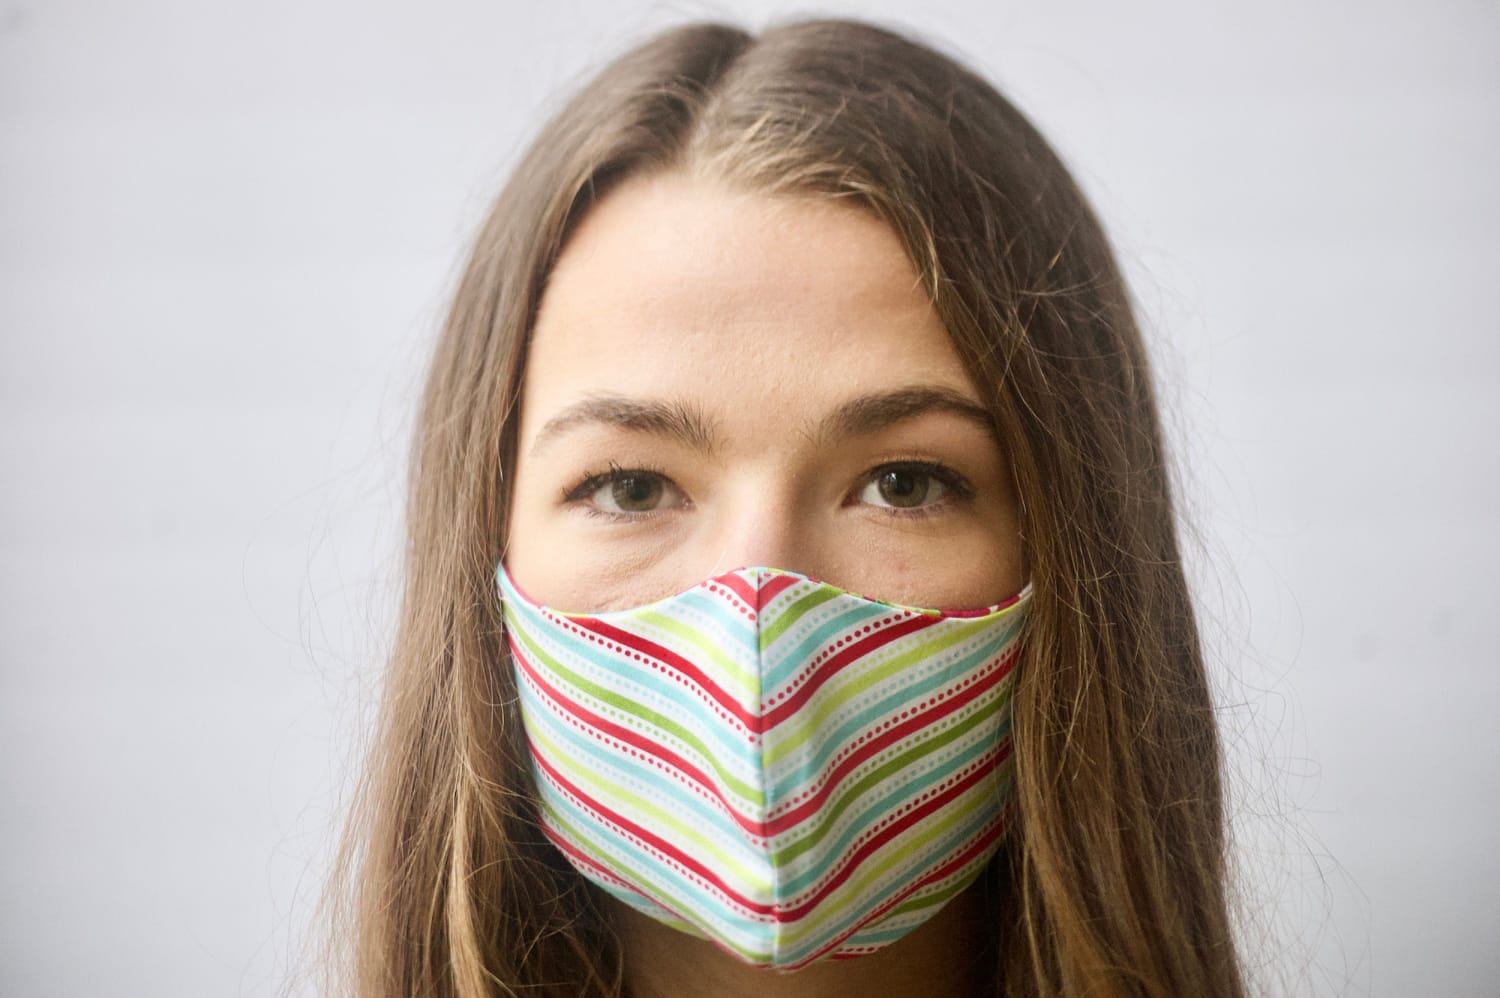 8 Creative Face Masks To Protect You While You Show Your Style